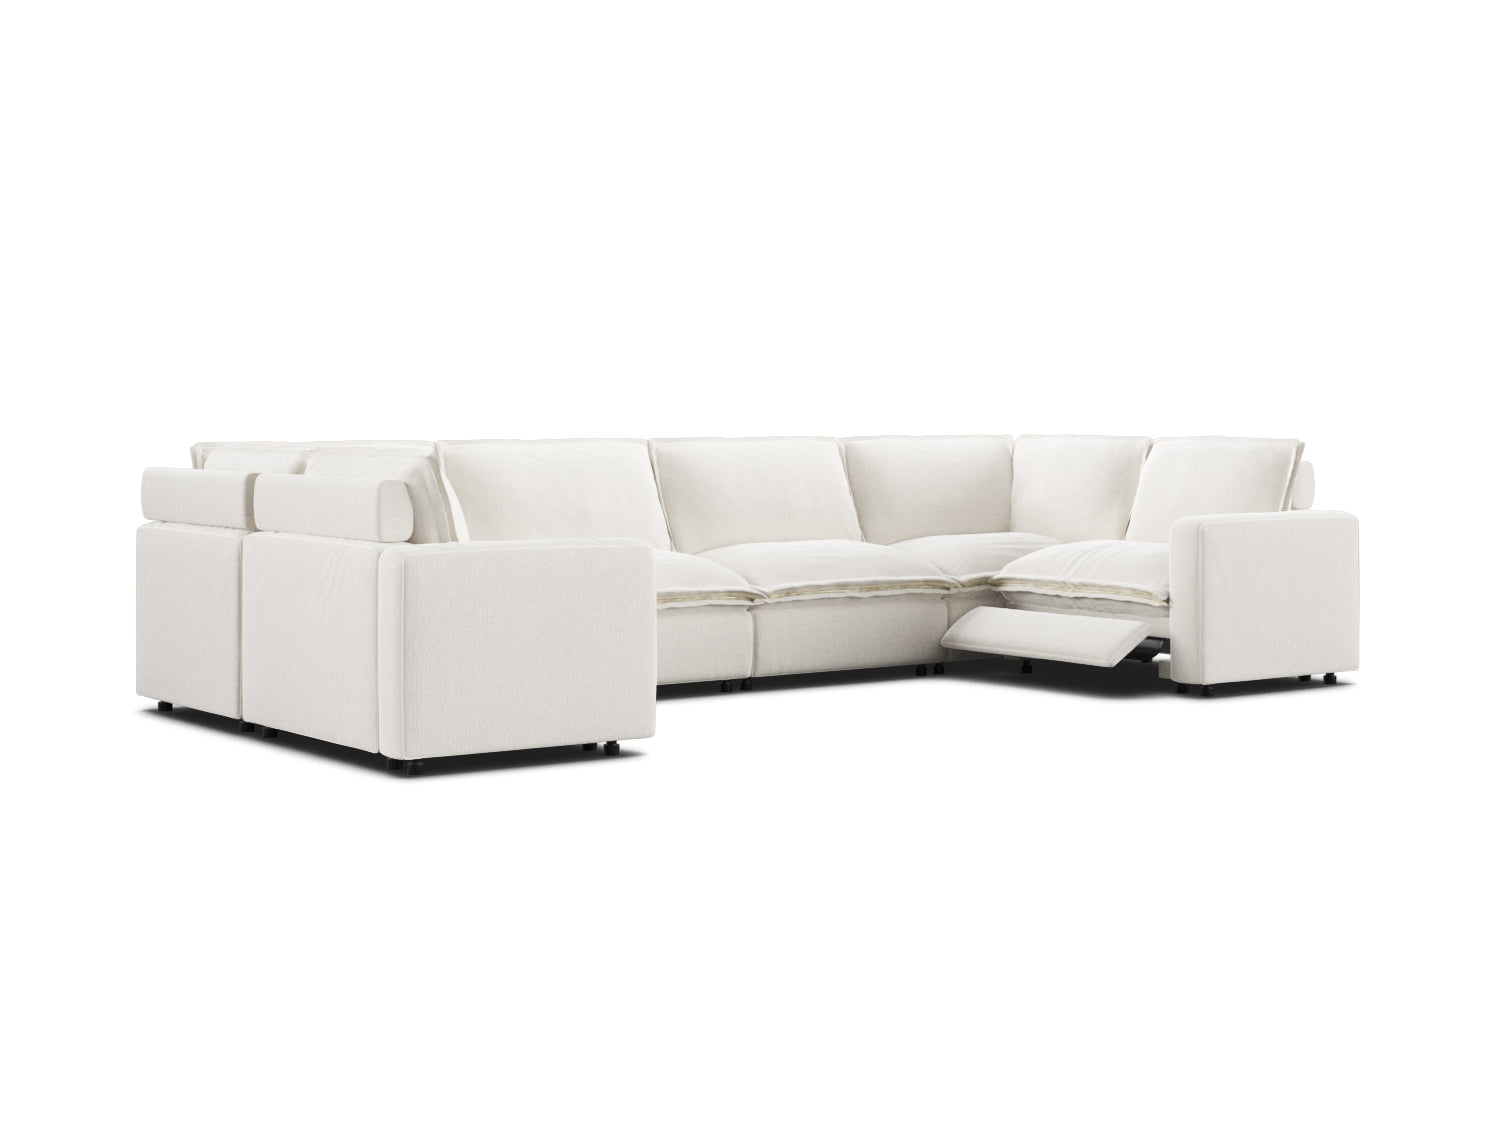 Reclining U-shaped sectional couch in white linen, modular